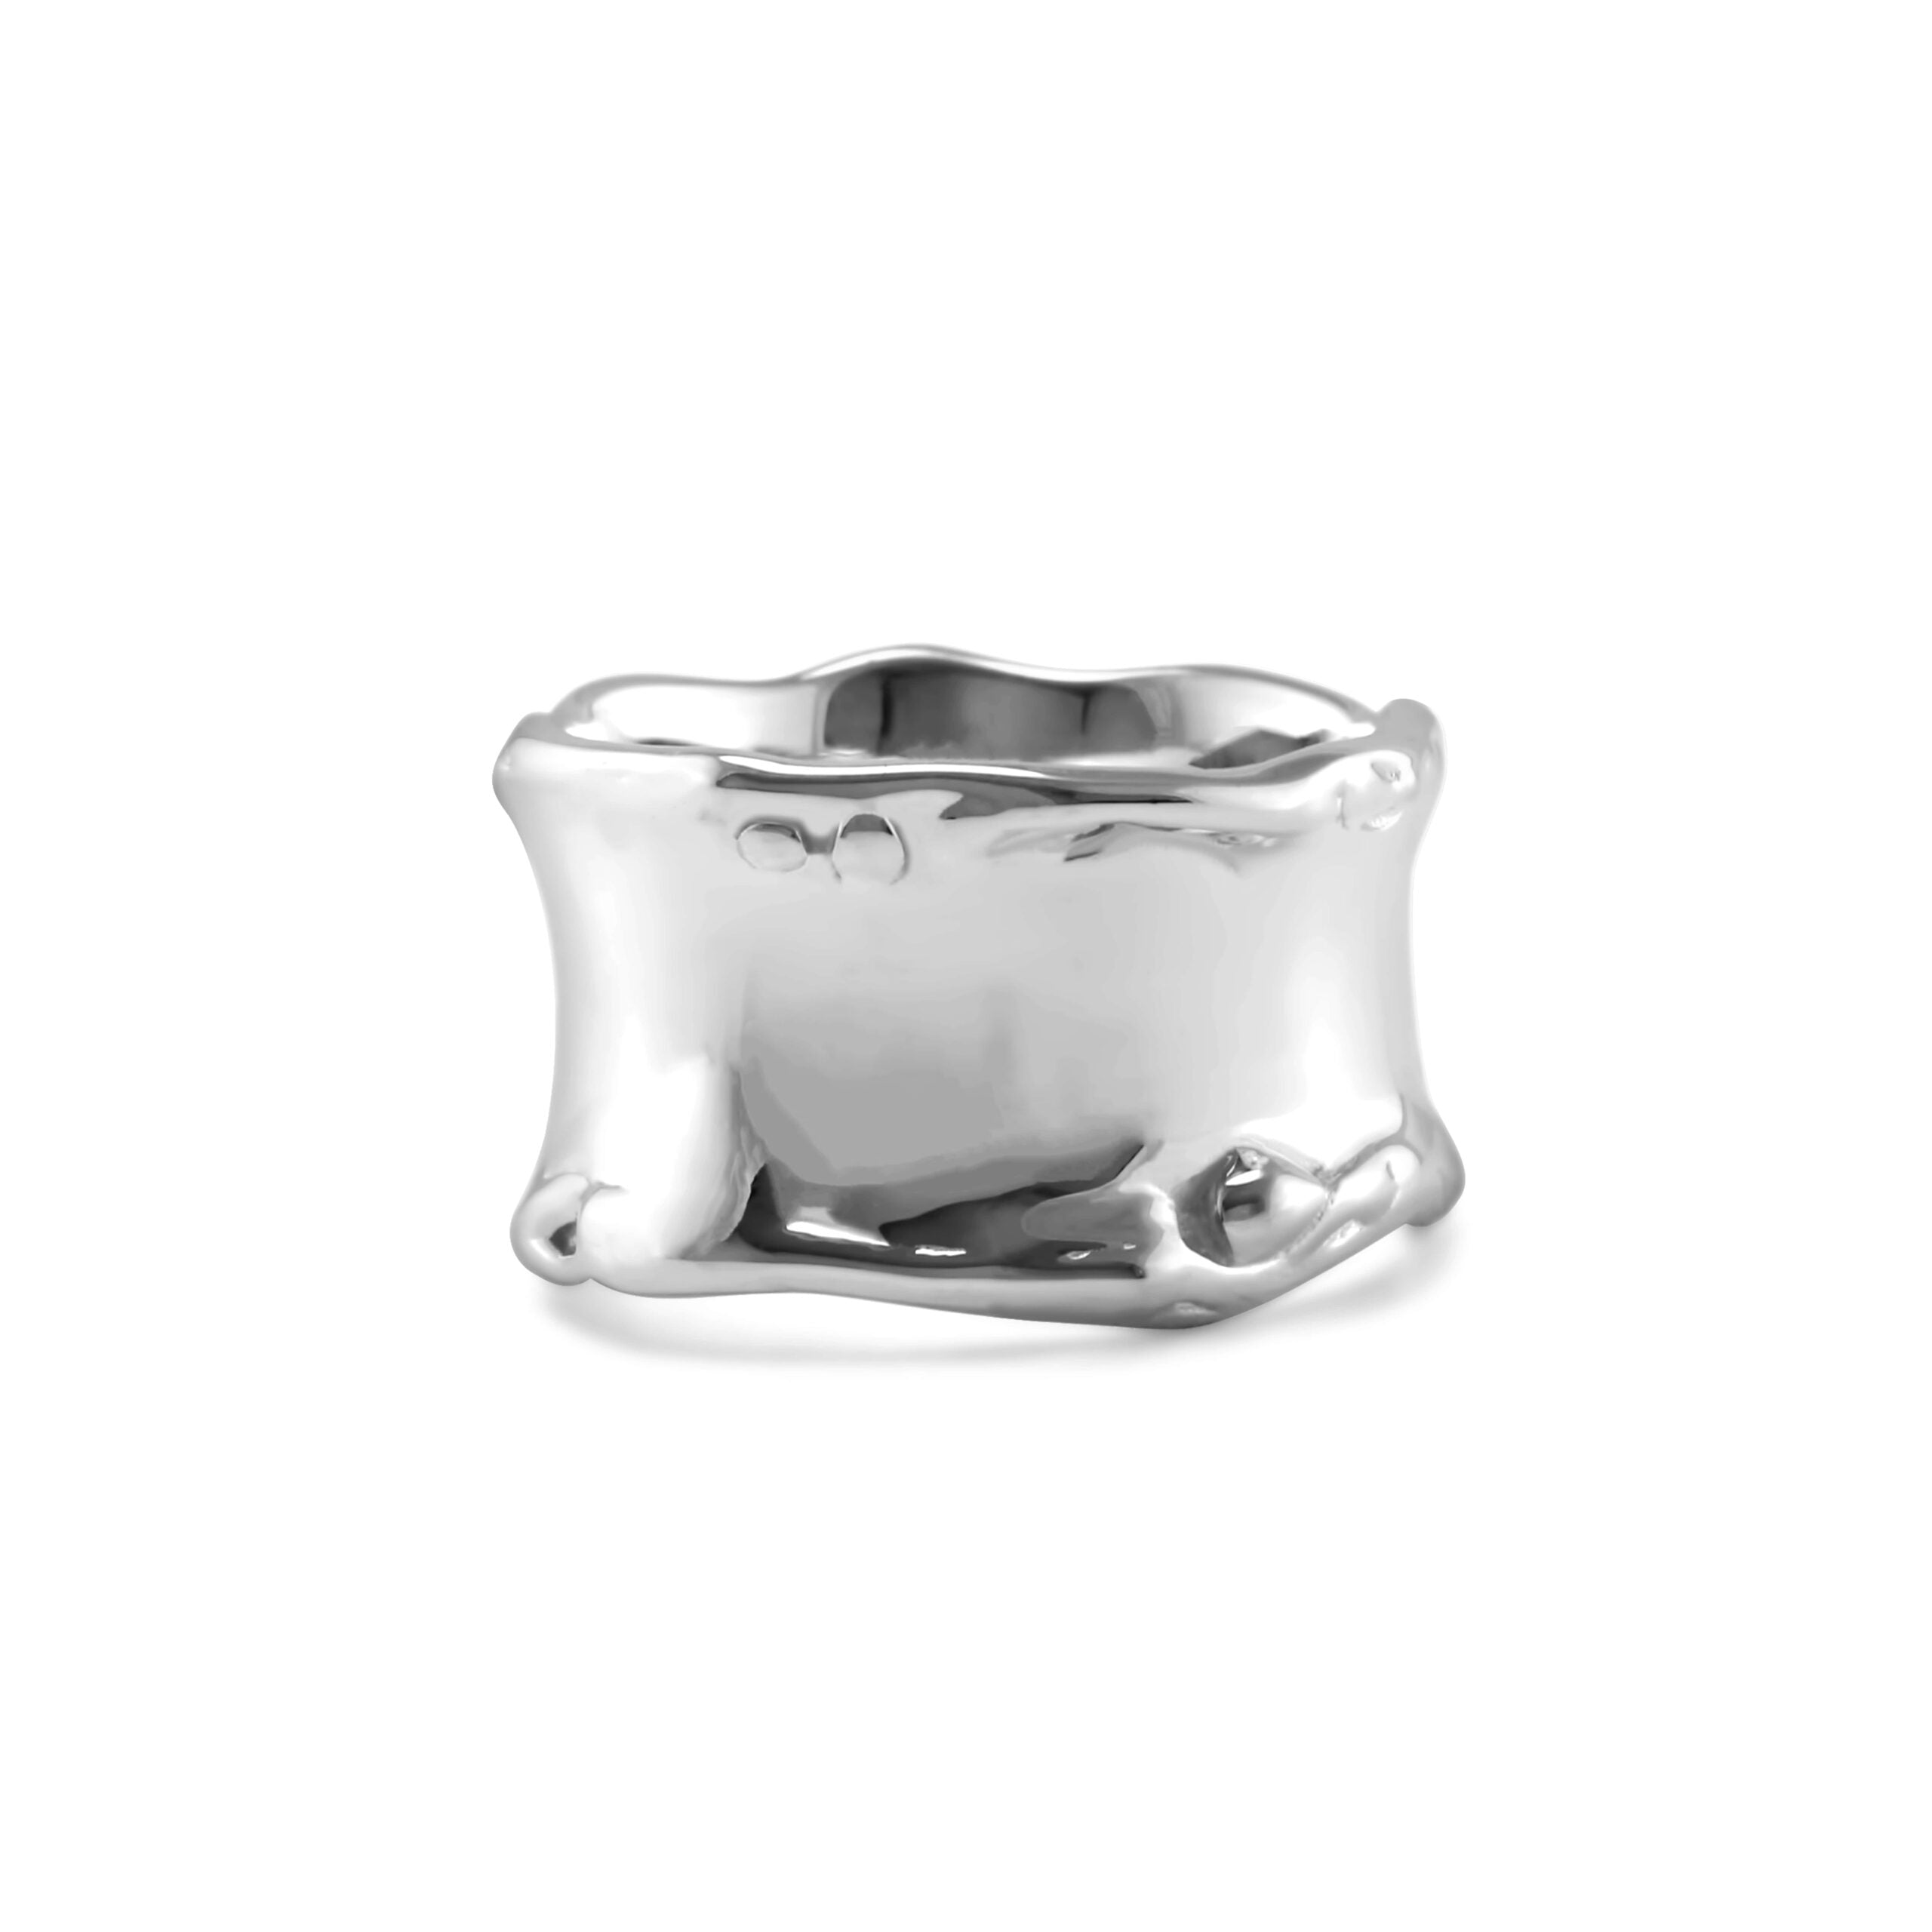 Silver Engraved Ring - The Nancy Smillie Shop - Art, Jewellery & Designer Gifts Glasgow